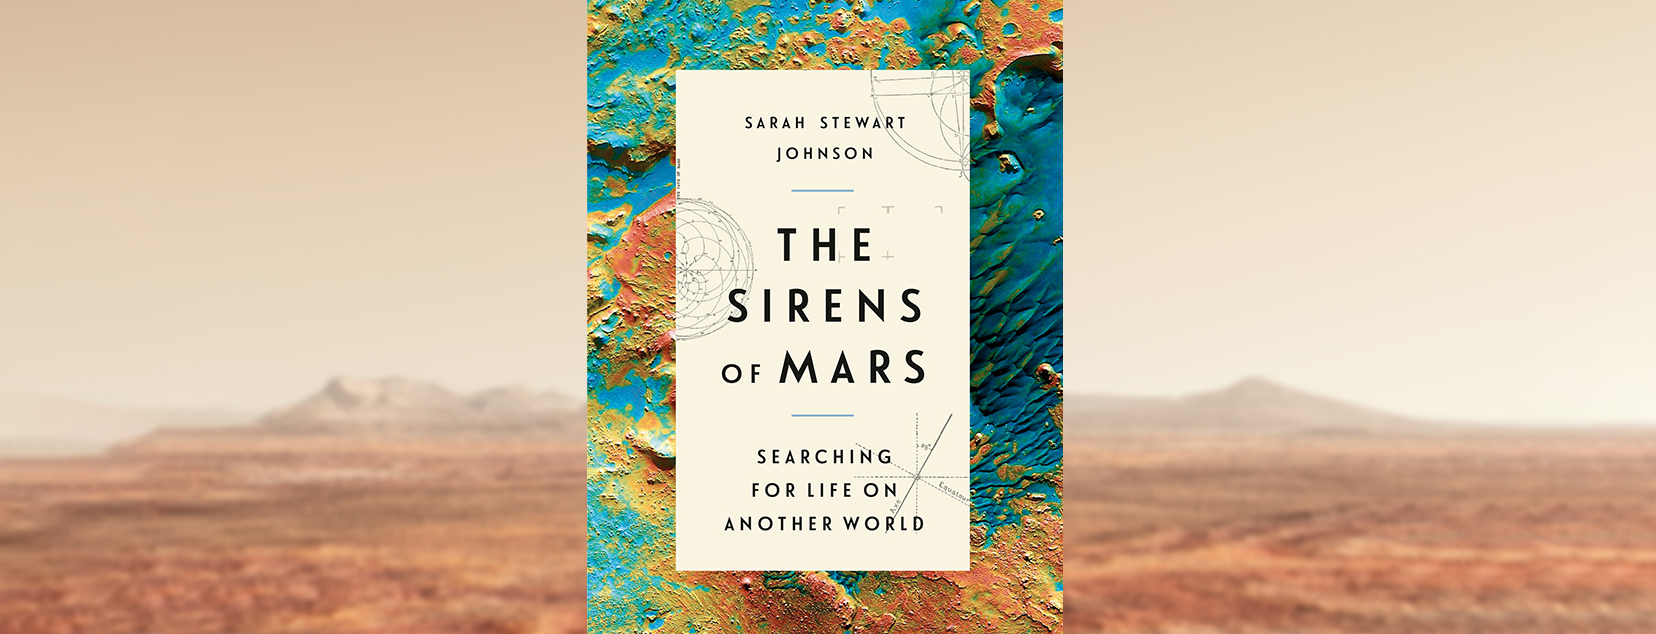 Sirens of Mars book cover